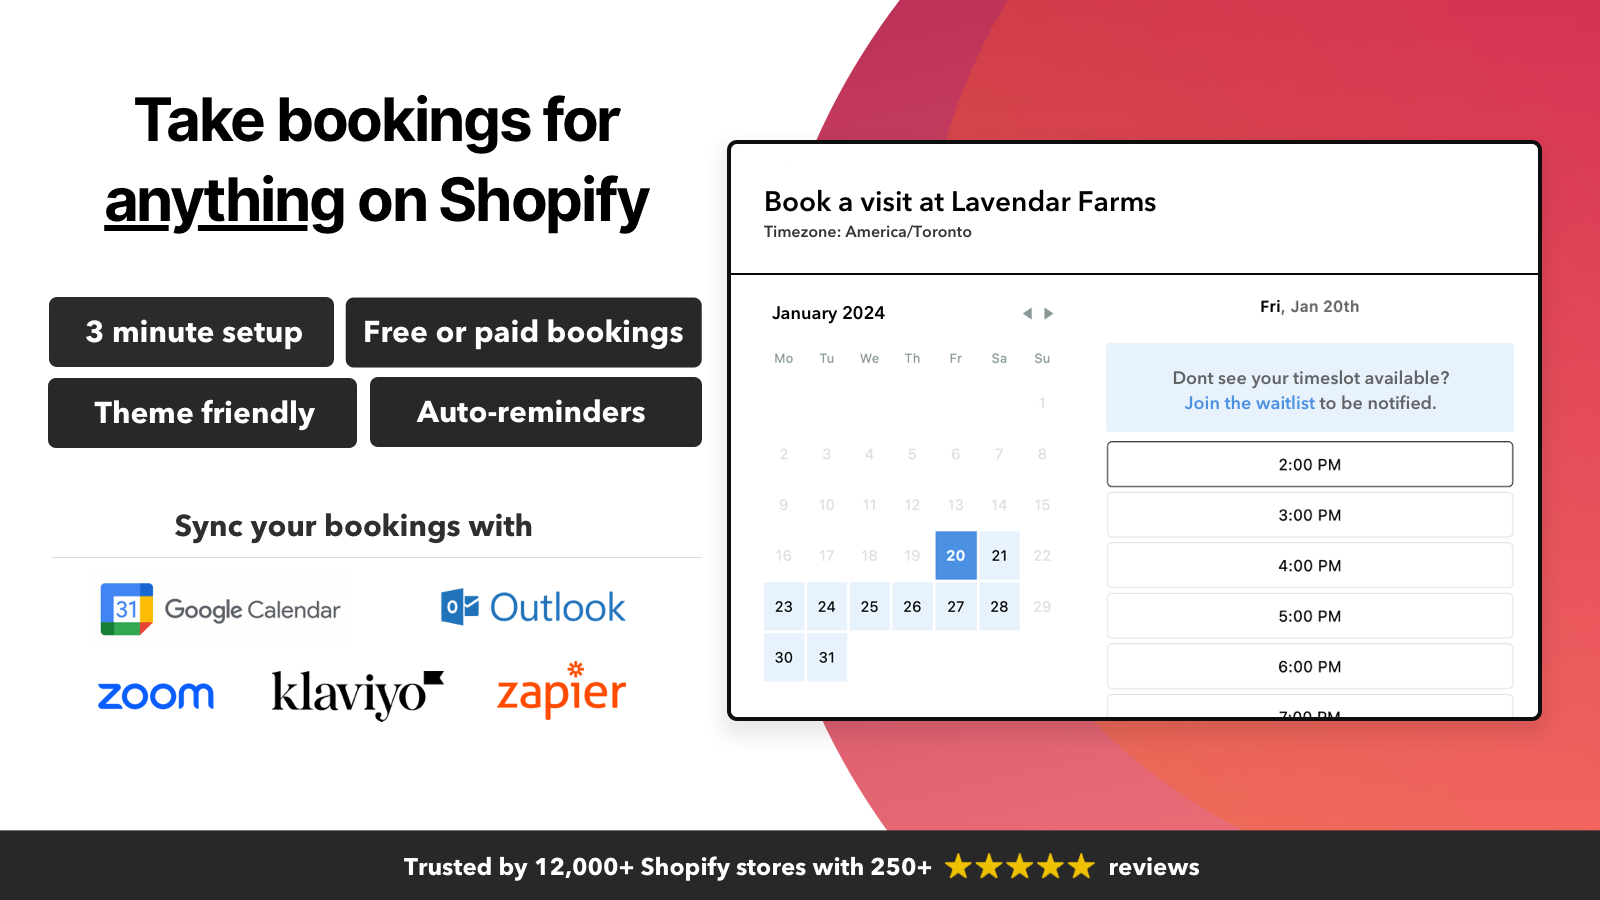 Take booking and appointments for anything on Shopify. 